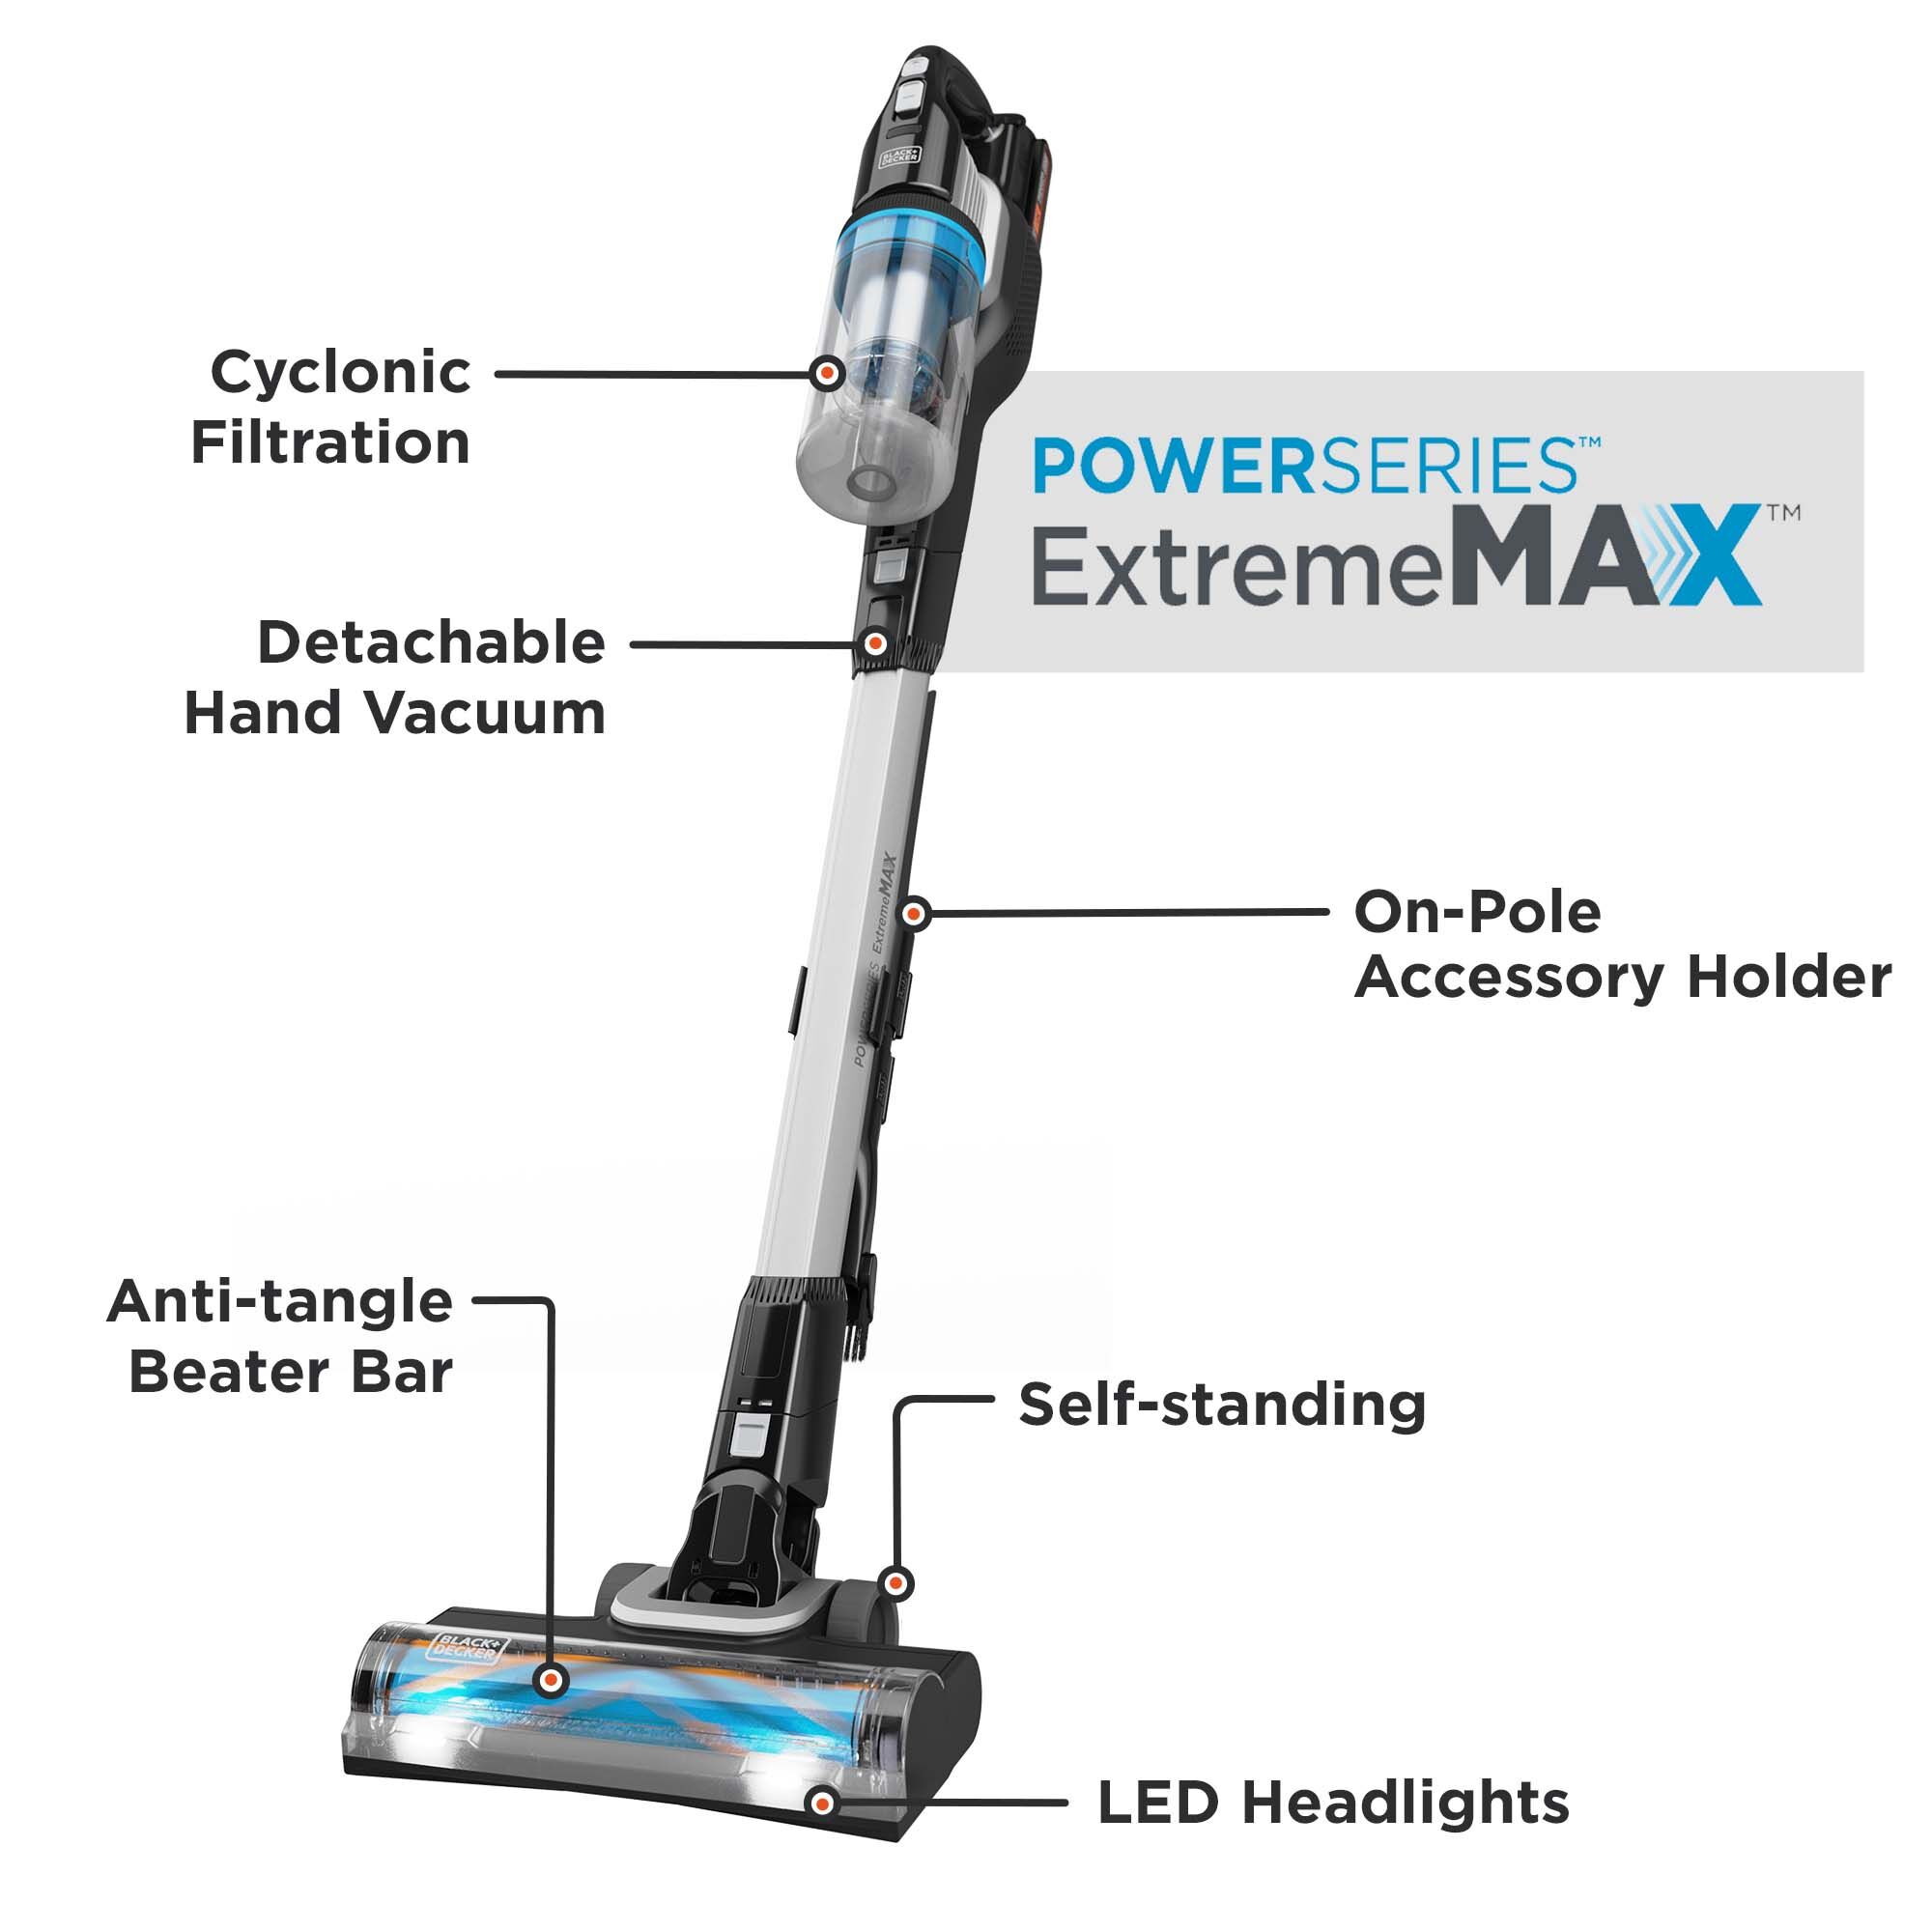 Product walkaround of the POWERSERIES Extreme MAX cordless stick vac